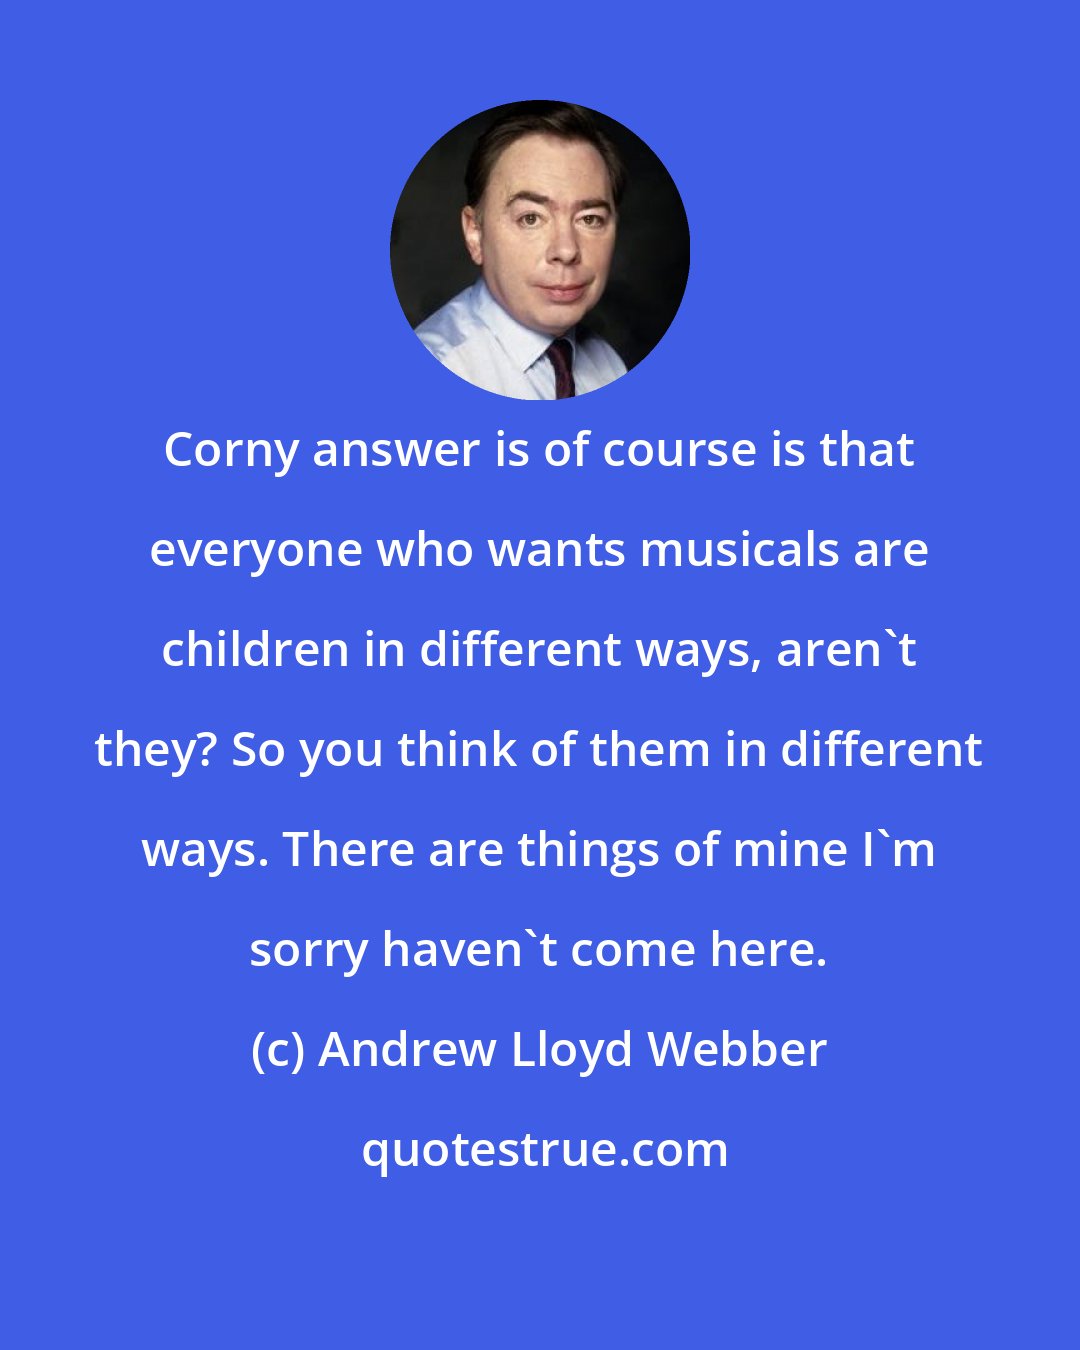 Andrew Lloyd Webber: Corny answer is of course is that everyone who wants musicals are children in different ways, aren't they? So you think of them in different ways. There are things of mine I'm sorry haven't come here.